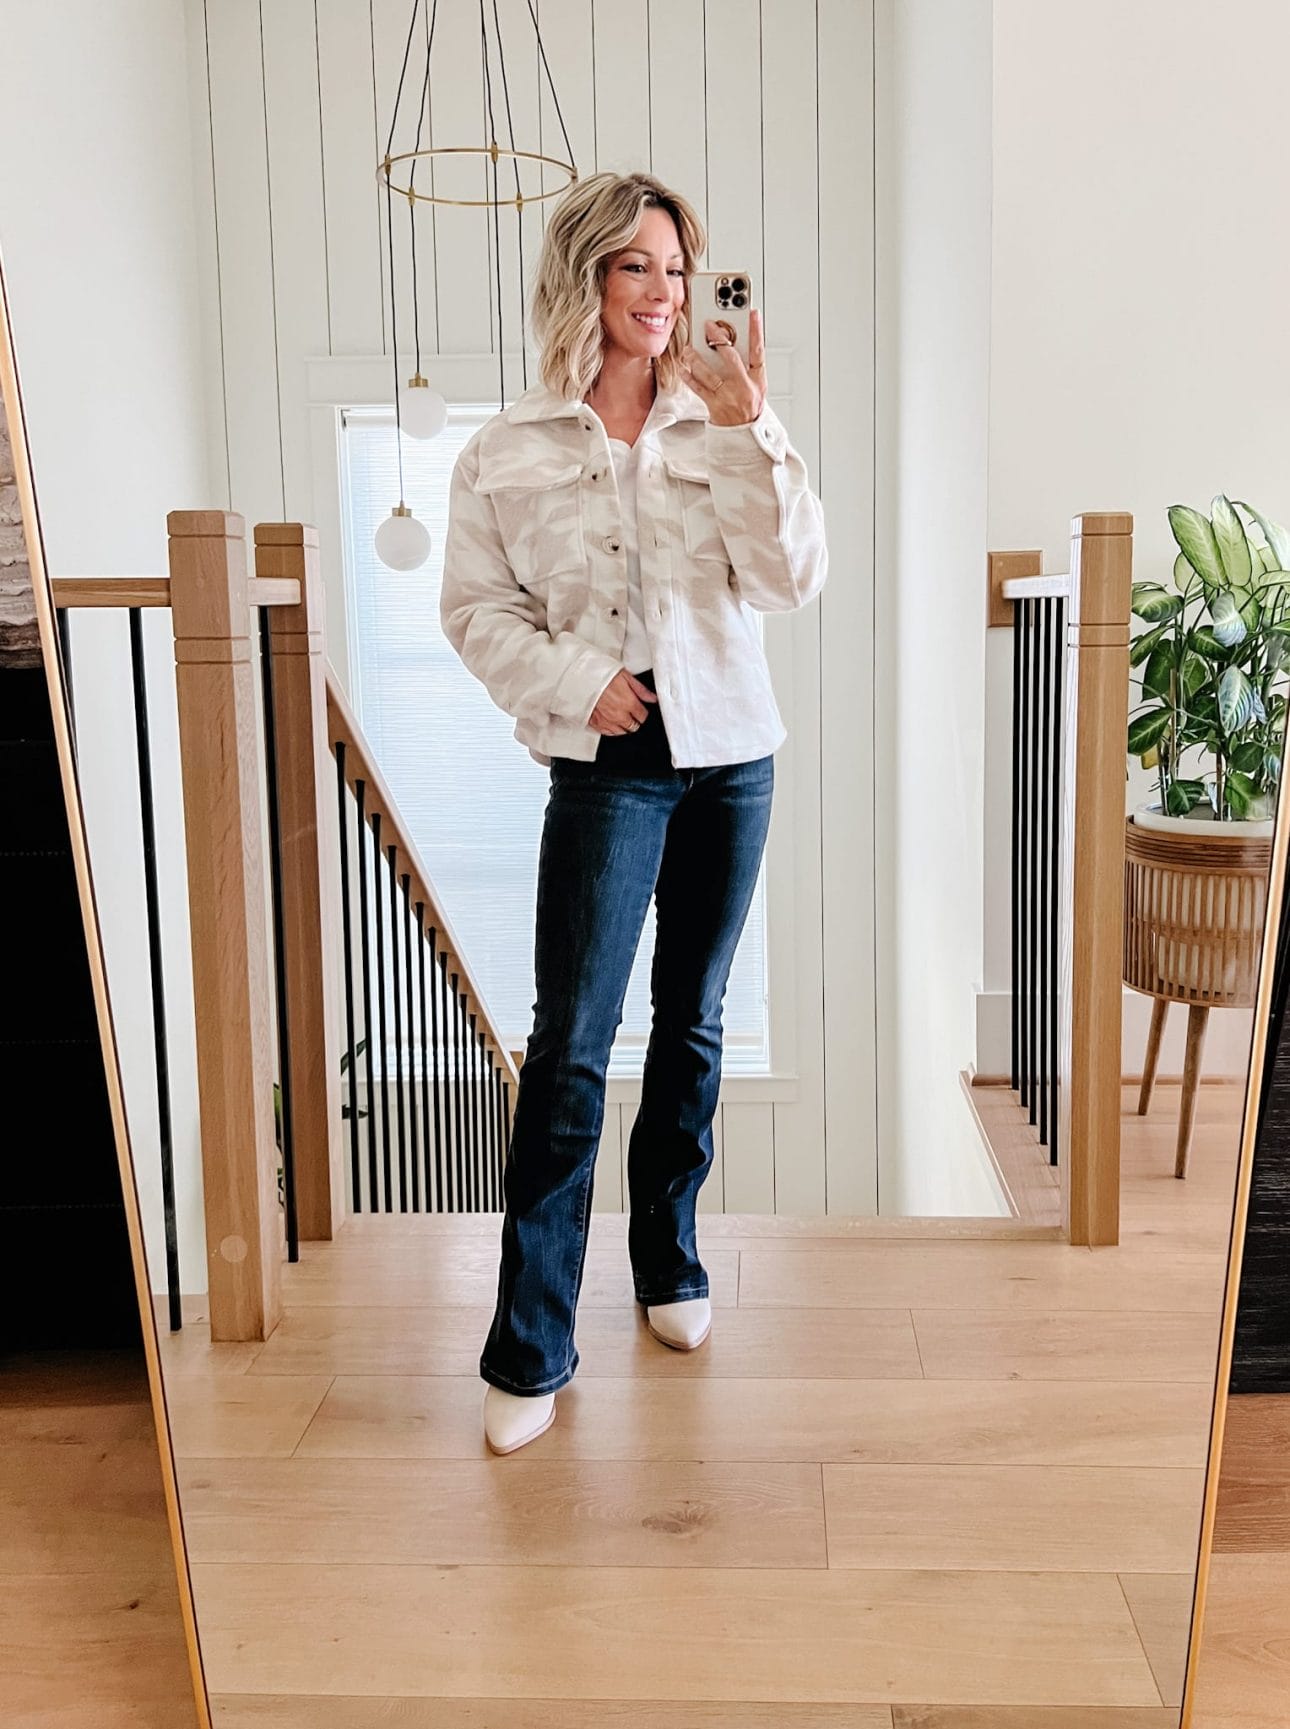 Walmart fleece jacket and jeans outfit